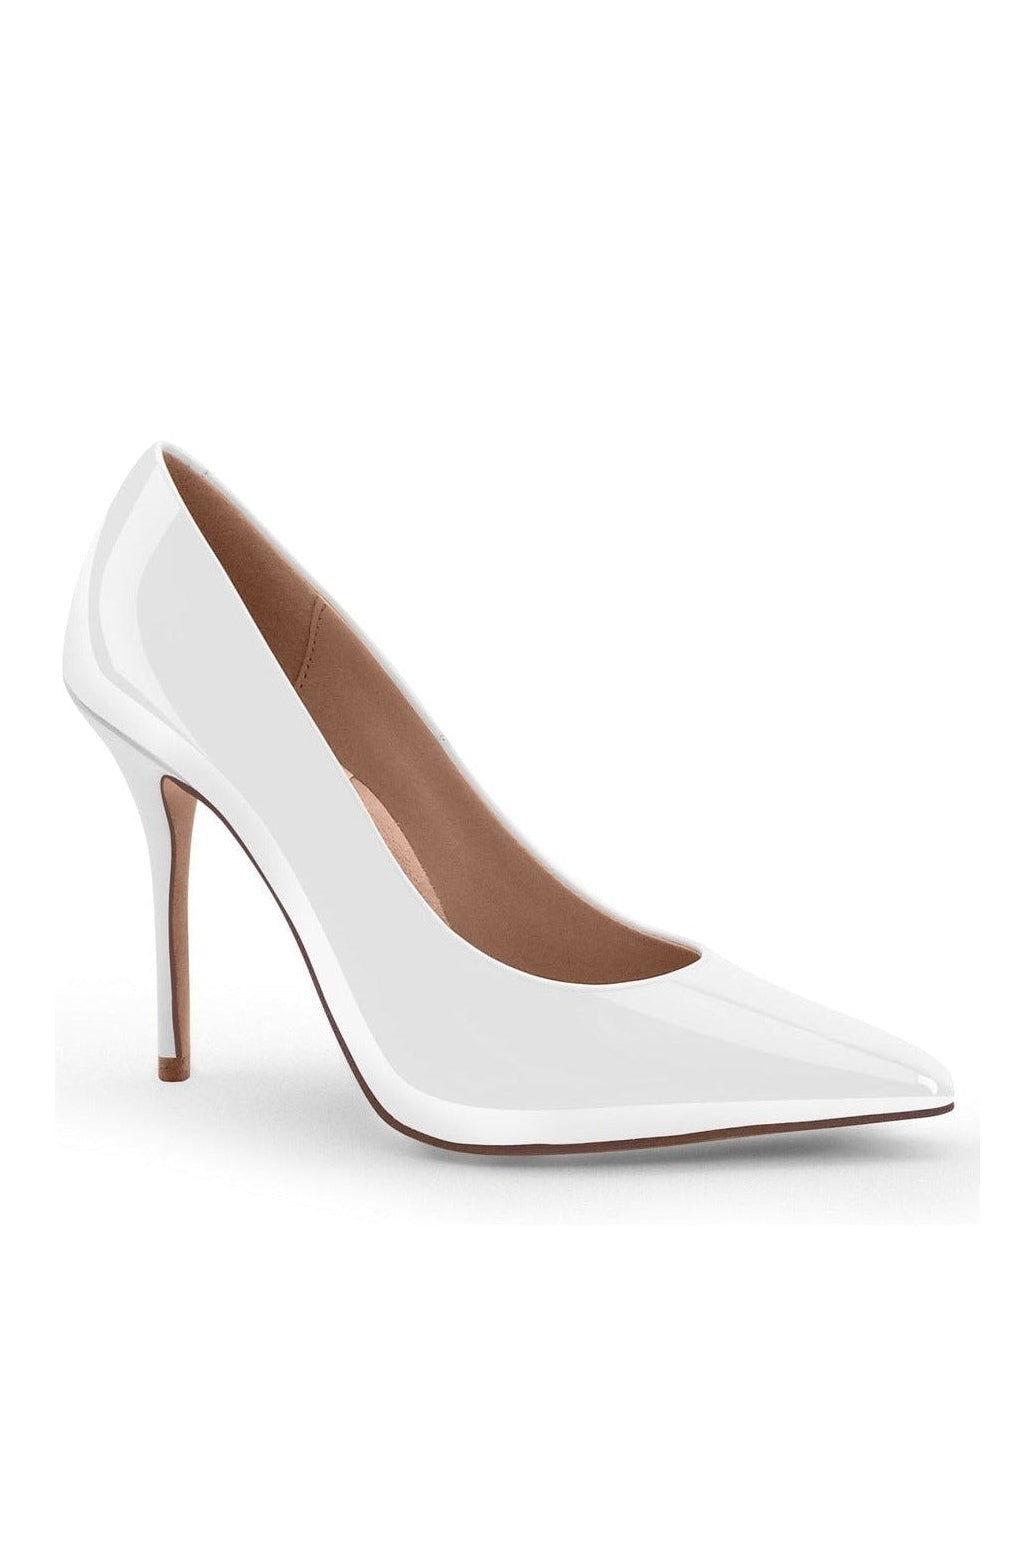 Super Sexy Classic Pump with Micro Stiletto Heel-Pumps-Sexyshoes Signature-White-SEXYSHOES.COM